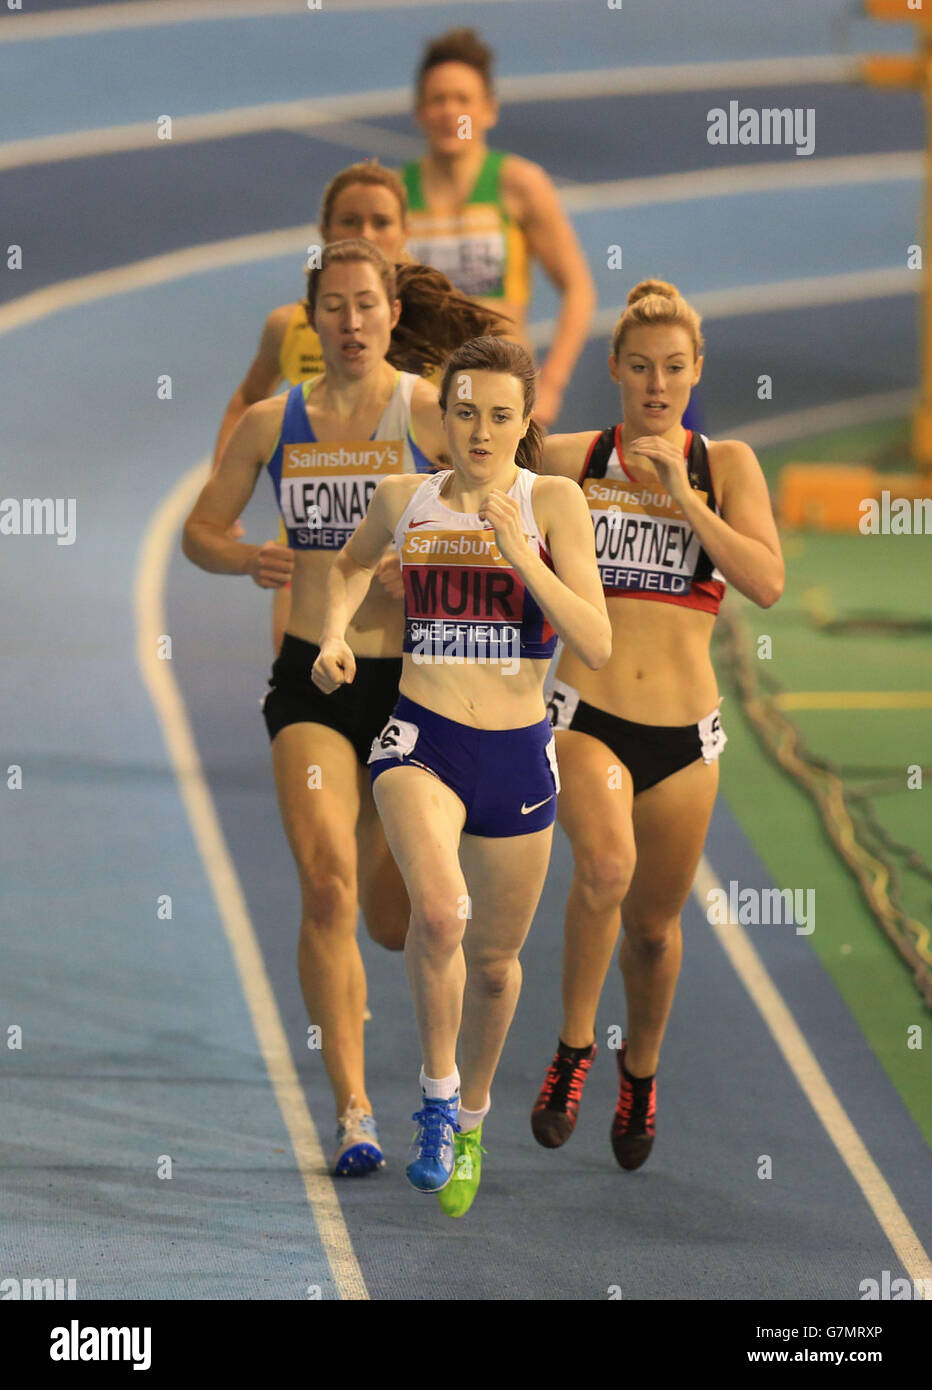 Laura Muir on her way to winning the women's 1500m final during day two of the Sainsbury's British Indoor Championships at the English Institute of Sport, Sheffield. Stock Photo